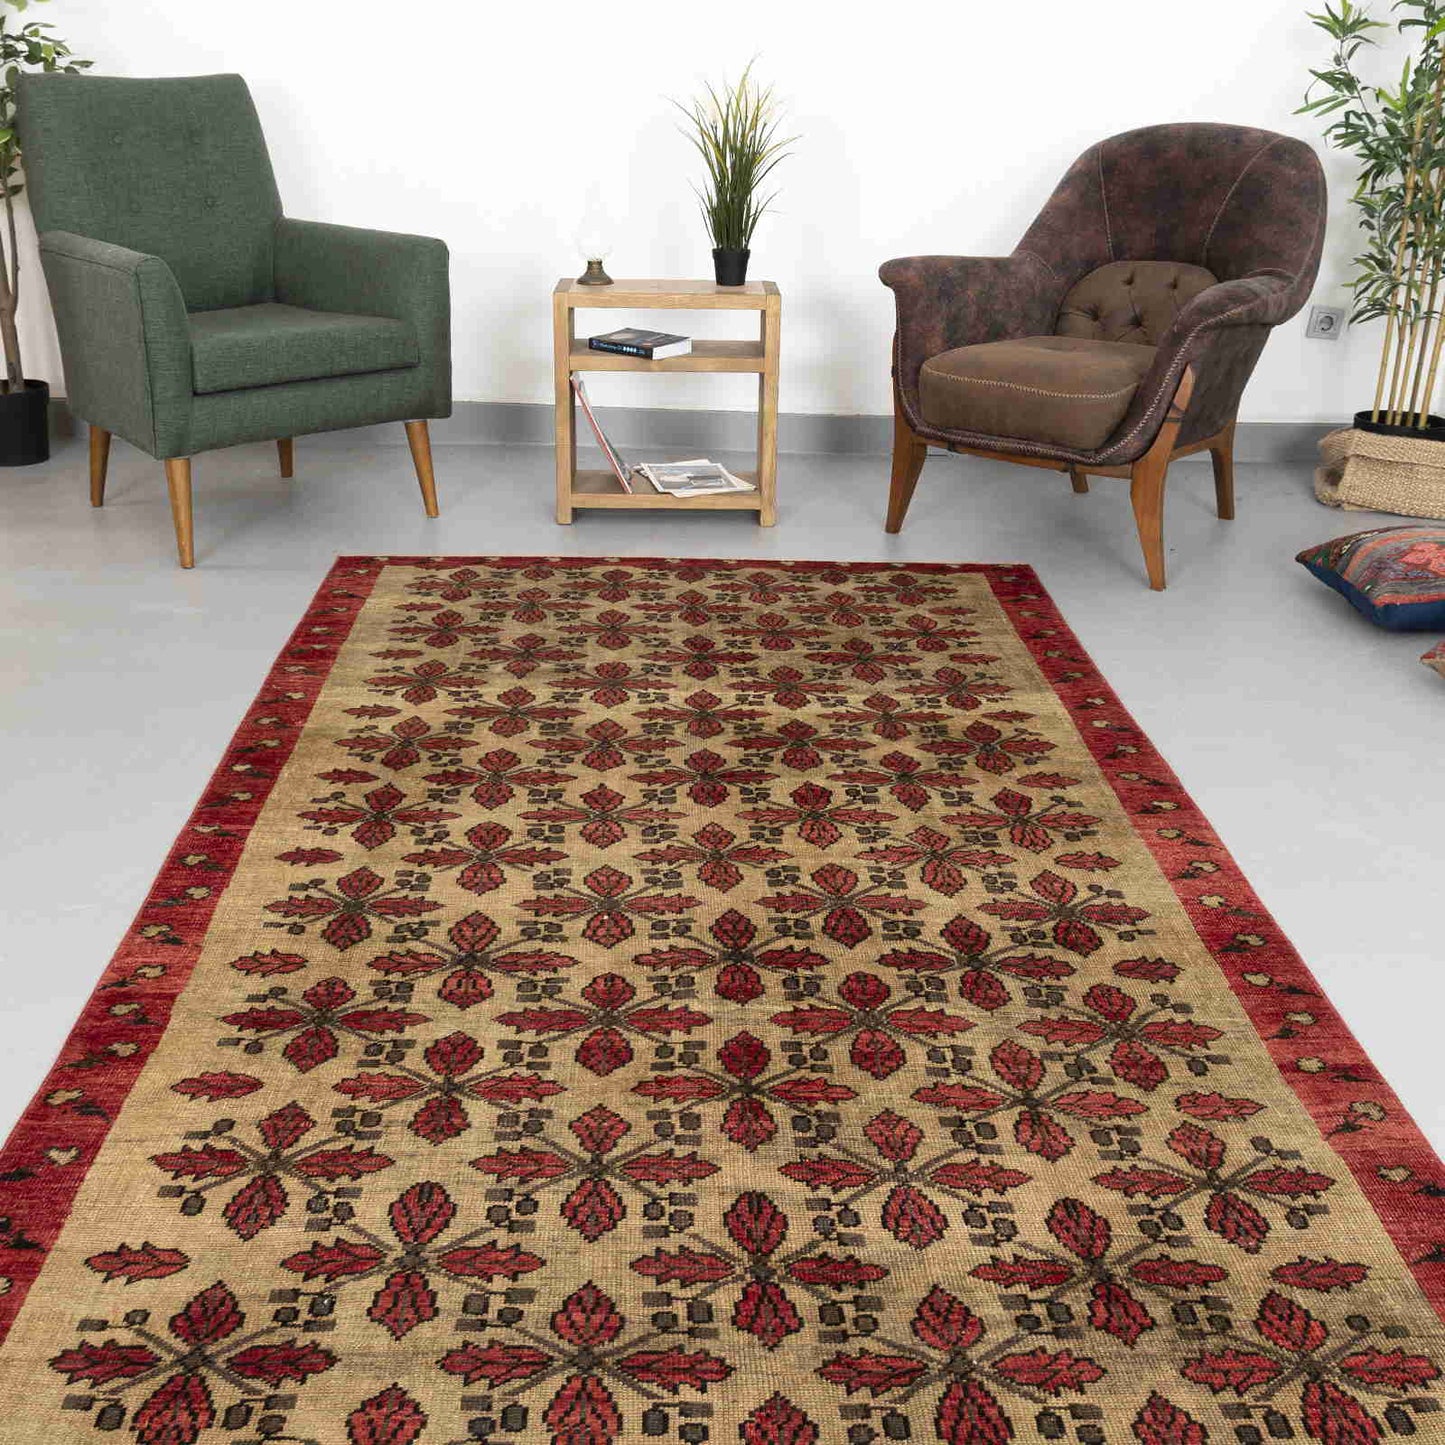 Oriental Rug Anatolian Hand Knotted Wool On Wool 151 X 274 Cm - 5' X 9' Red C014 ER12